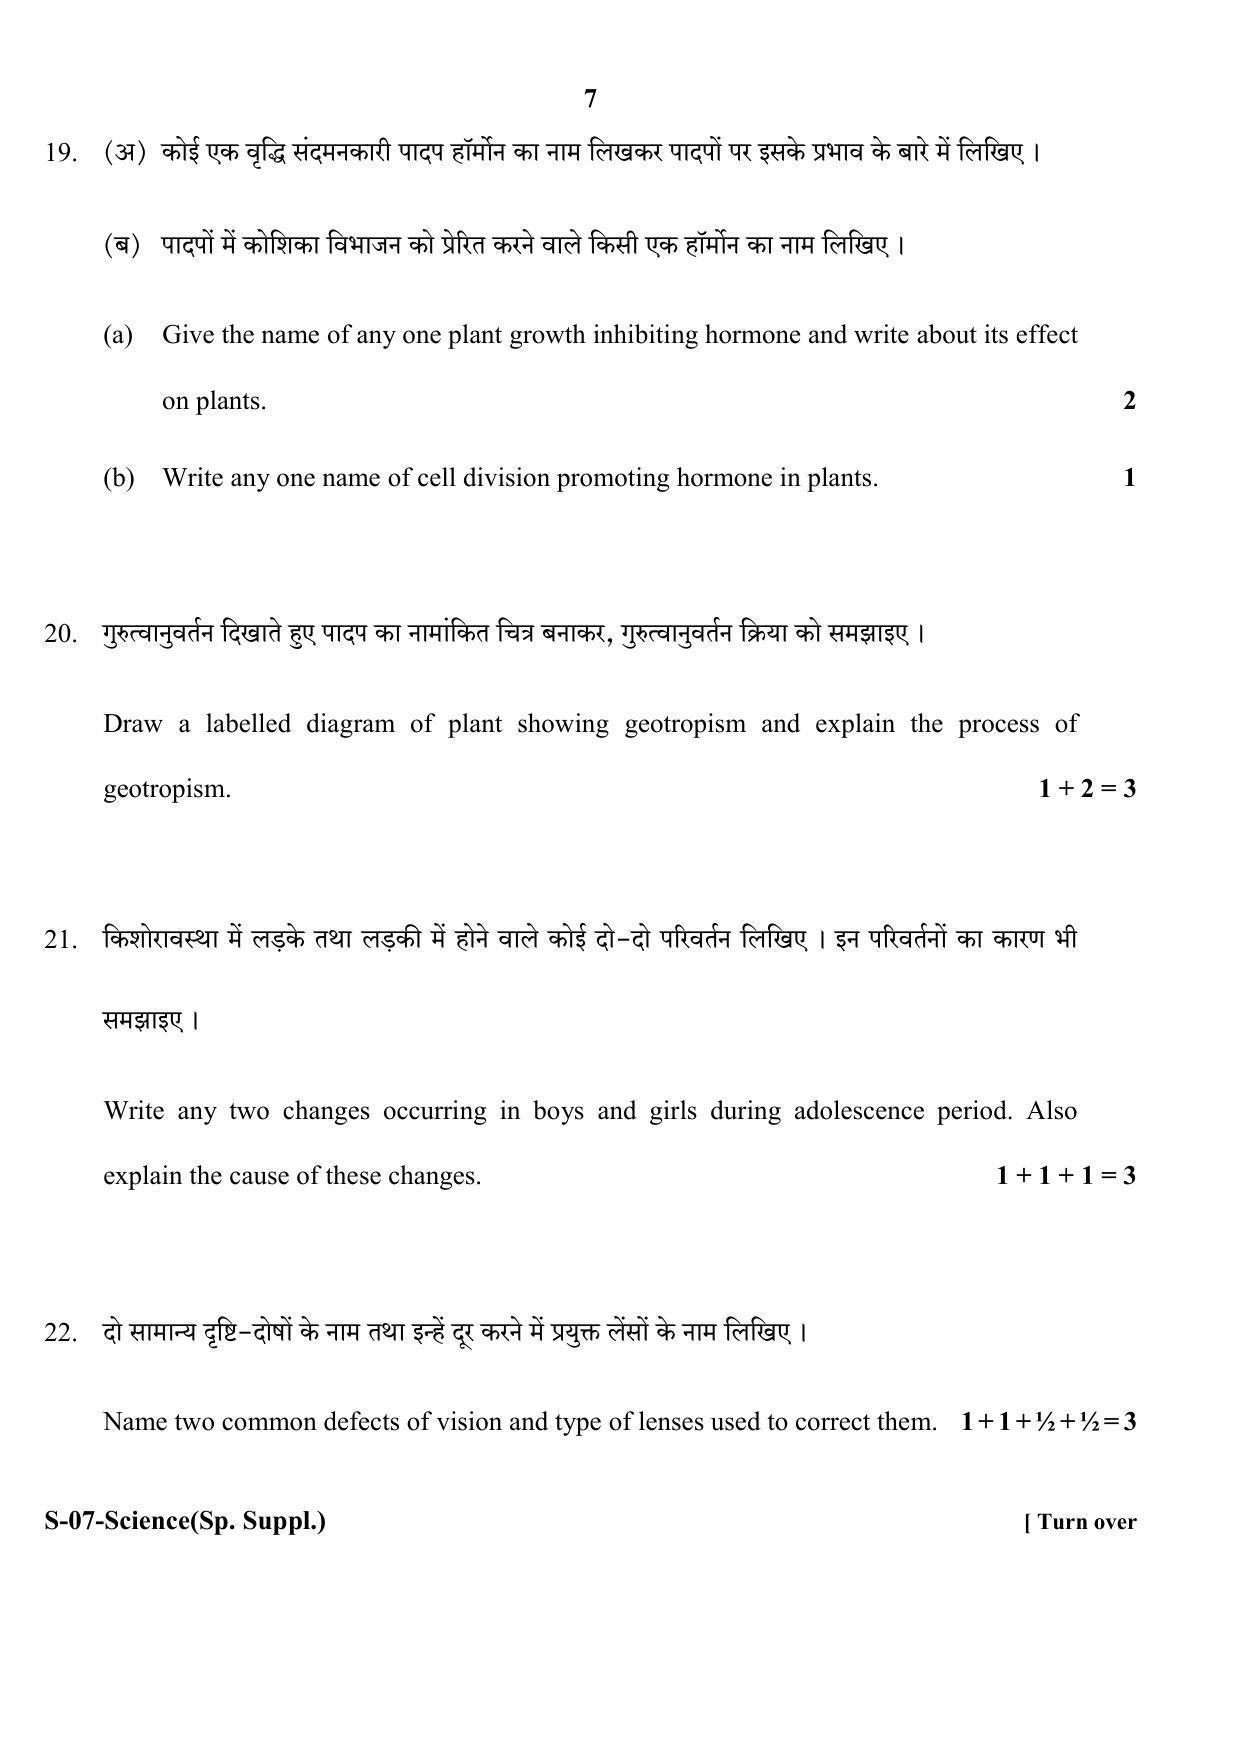 RBSE Class 10 Science ( supplementary) 2017 Question Paper - Page 7